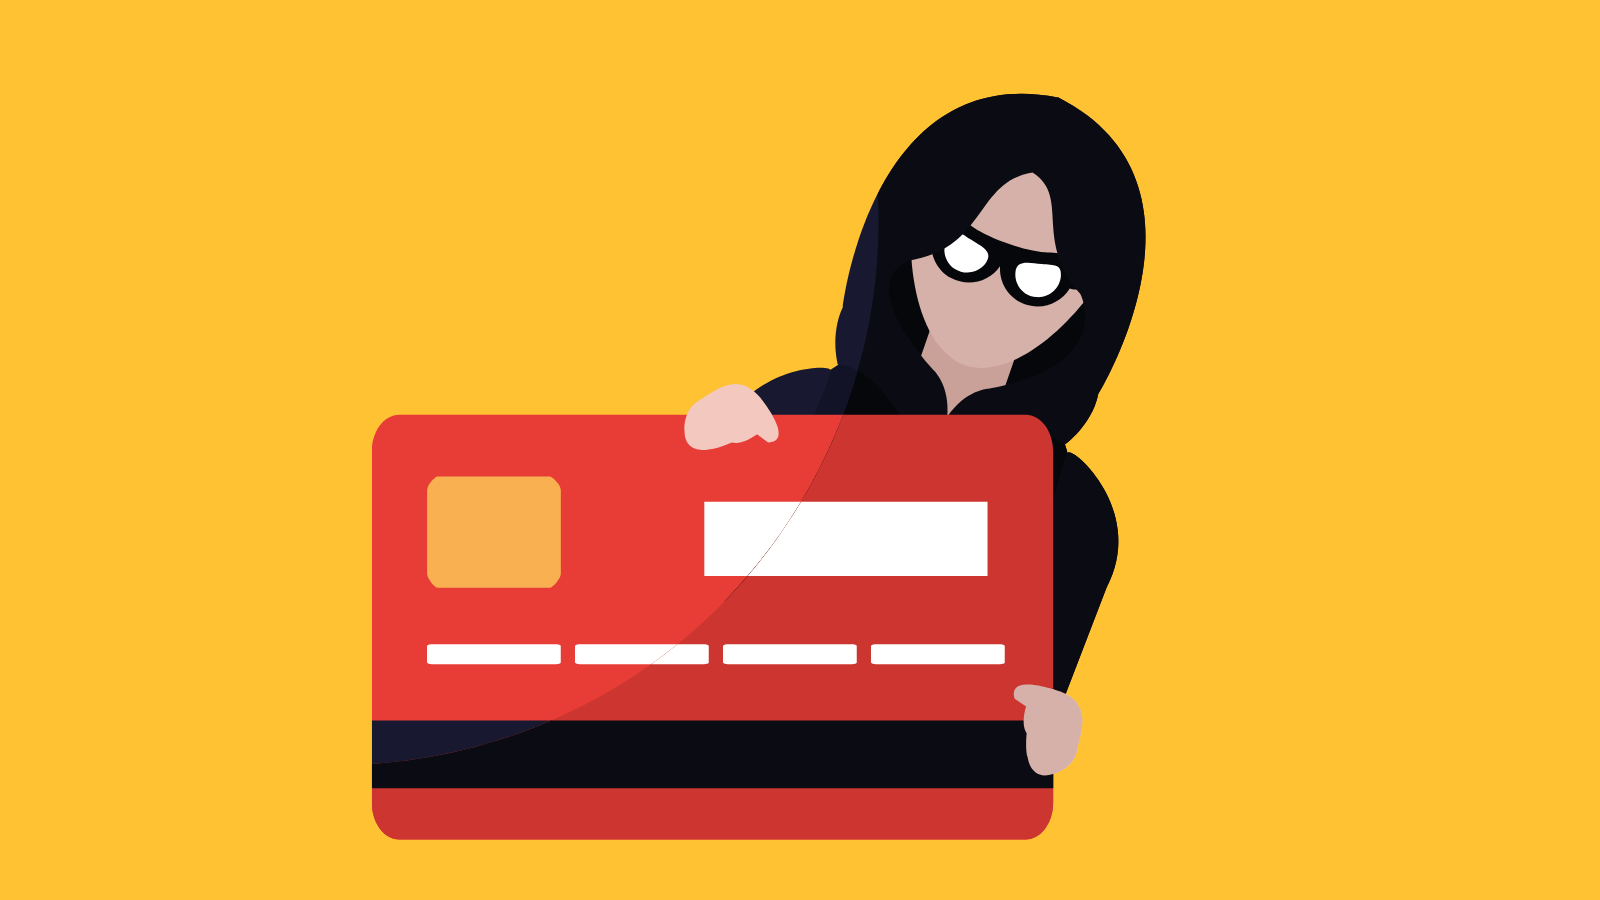 A person in sunglasses and a black hoodie hiding behind a giant credit card